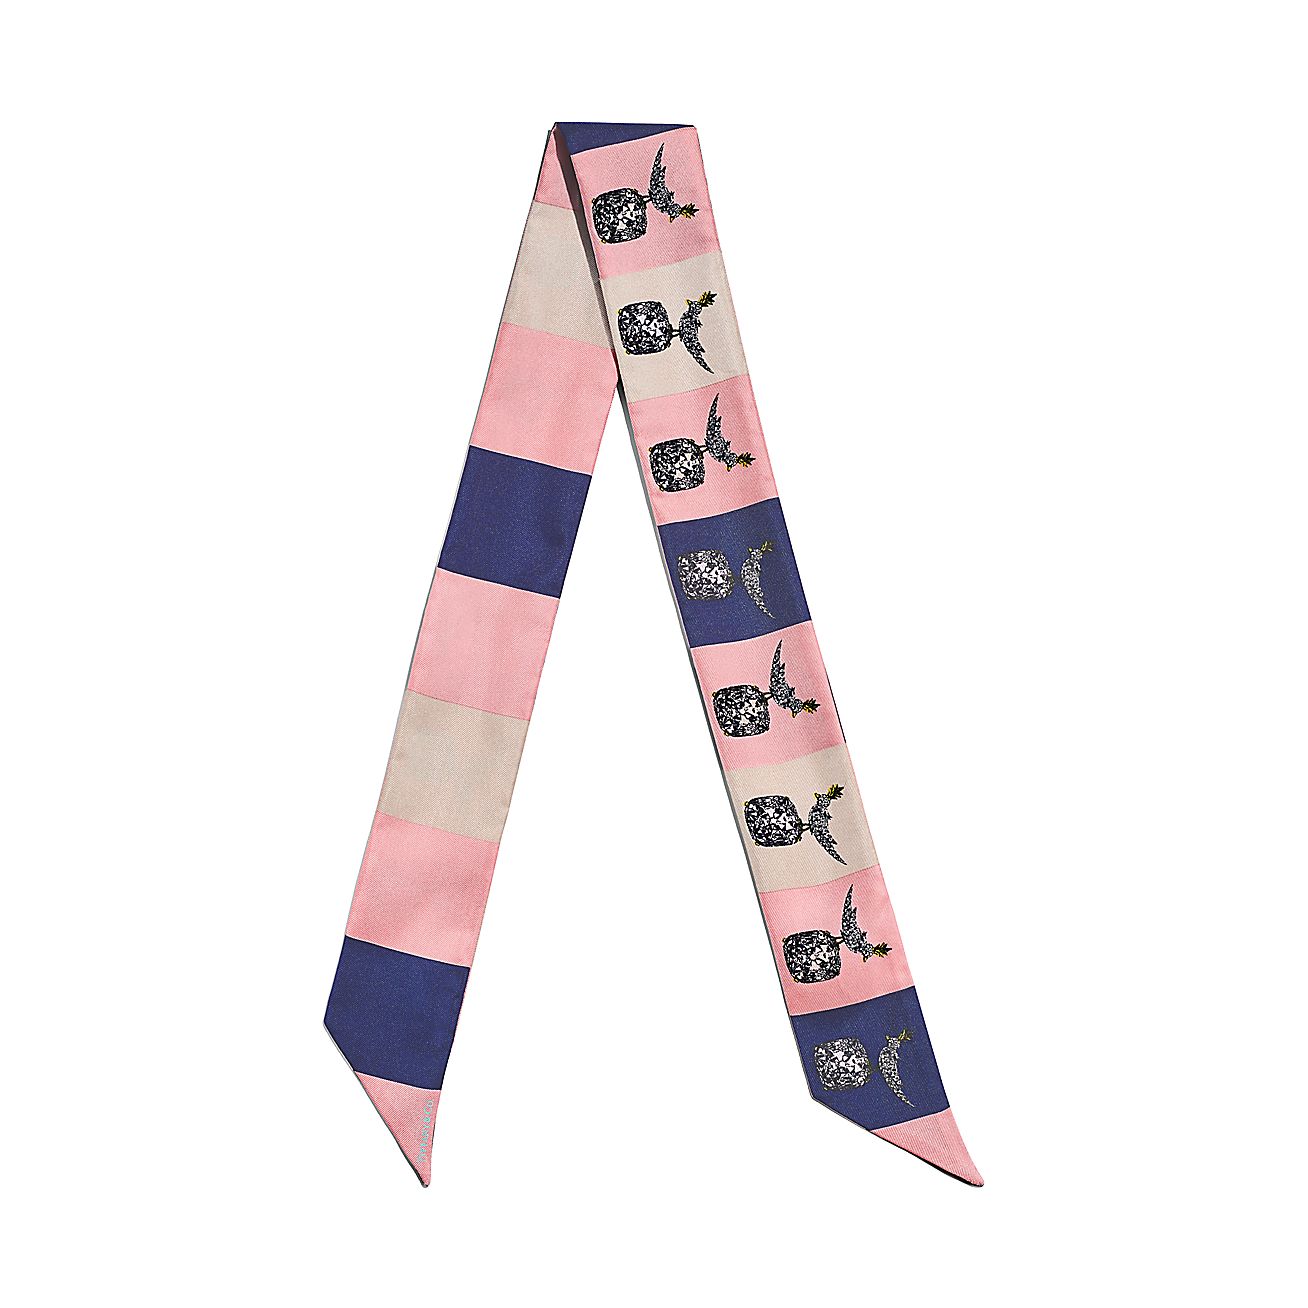 15 WAYS TO TIE A TWILLY ON A HANDBAG  Louis Vuitton Bandeau Scarf 